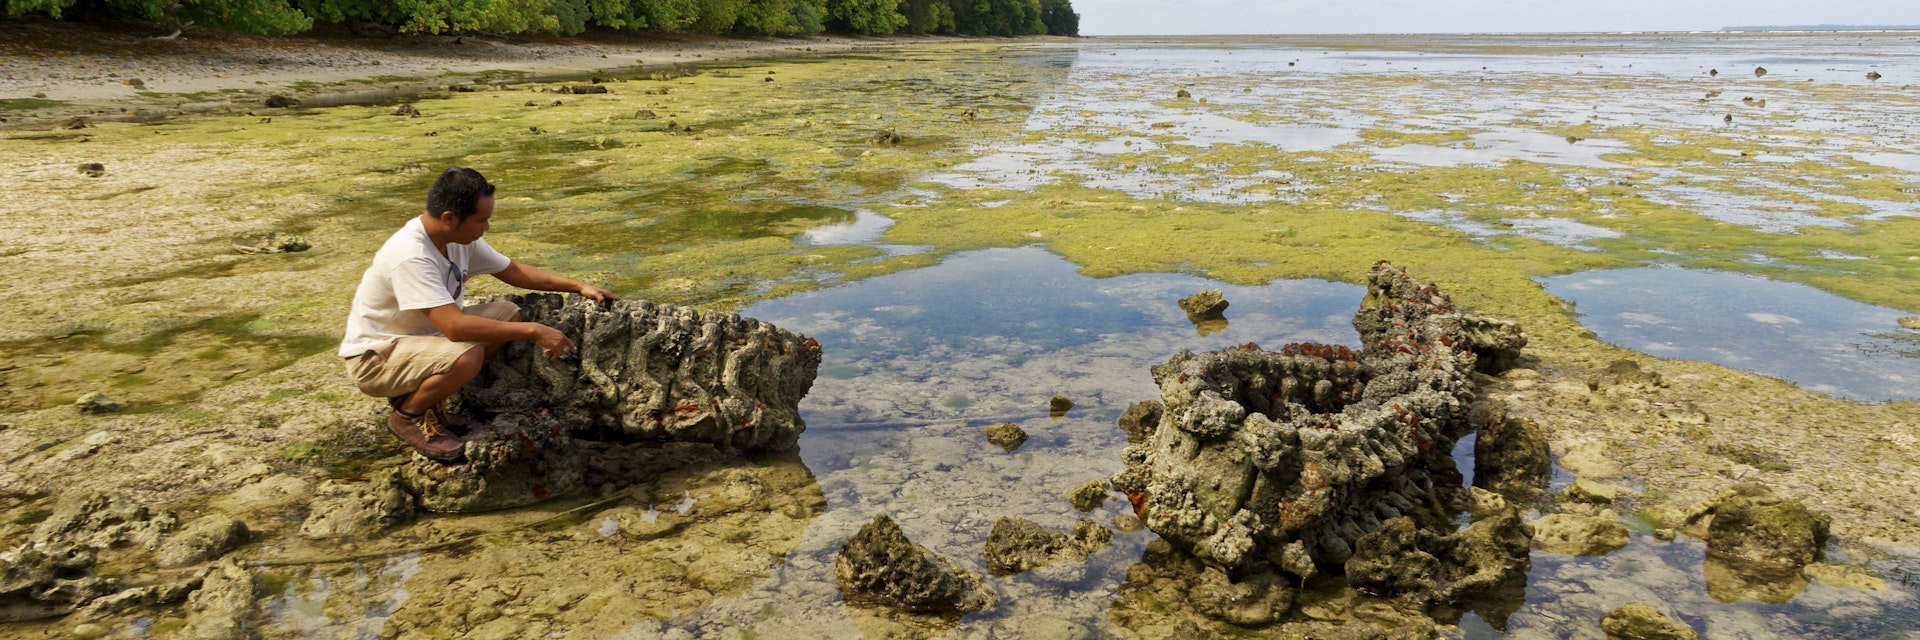 White Beach, Initial Landing of US troops in Sep 1944, Remnants of Sherman Tanks encrusted with corals and visible at low tide, Peleliu Island, Palau